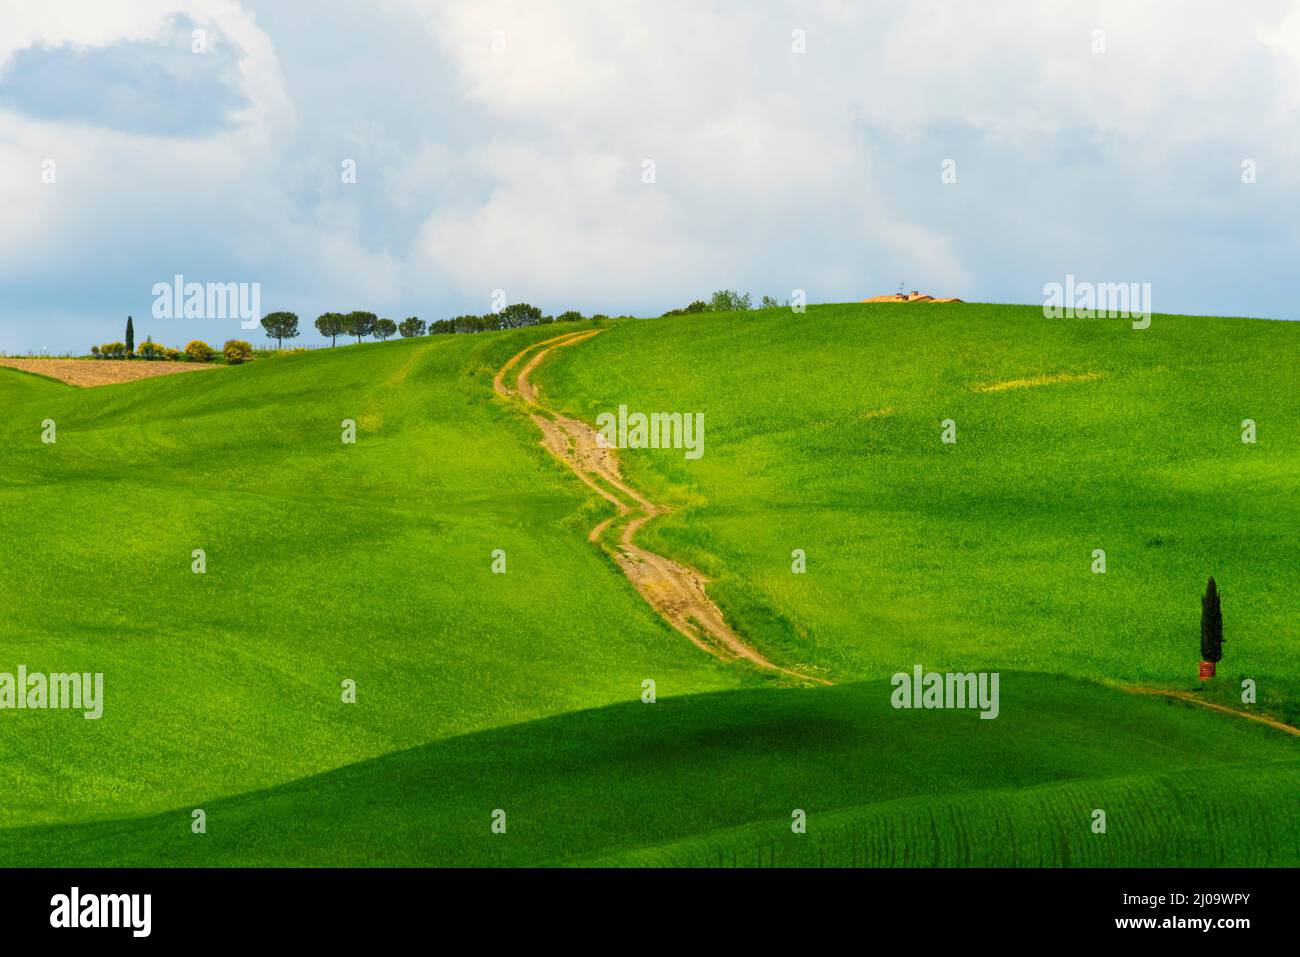 Winding path and cypress tree on the meadow, Siena Province, Tuscany Region, Italy Stock Photo